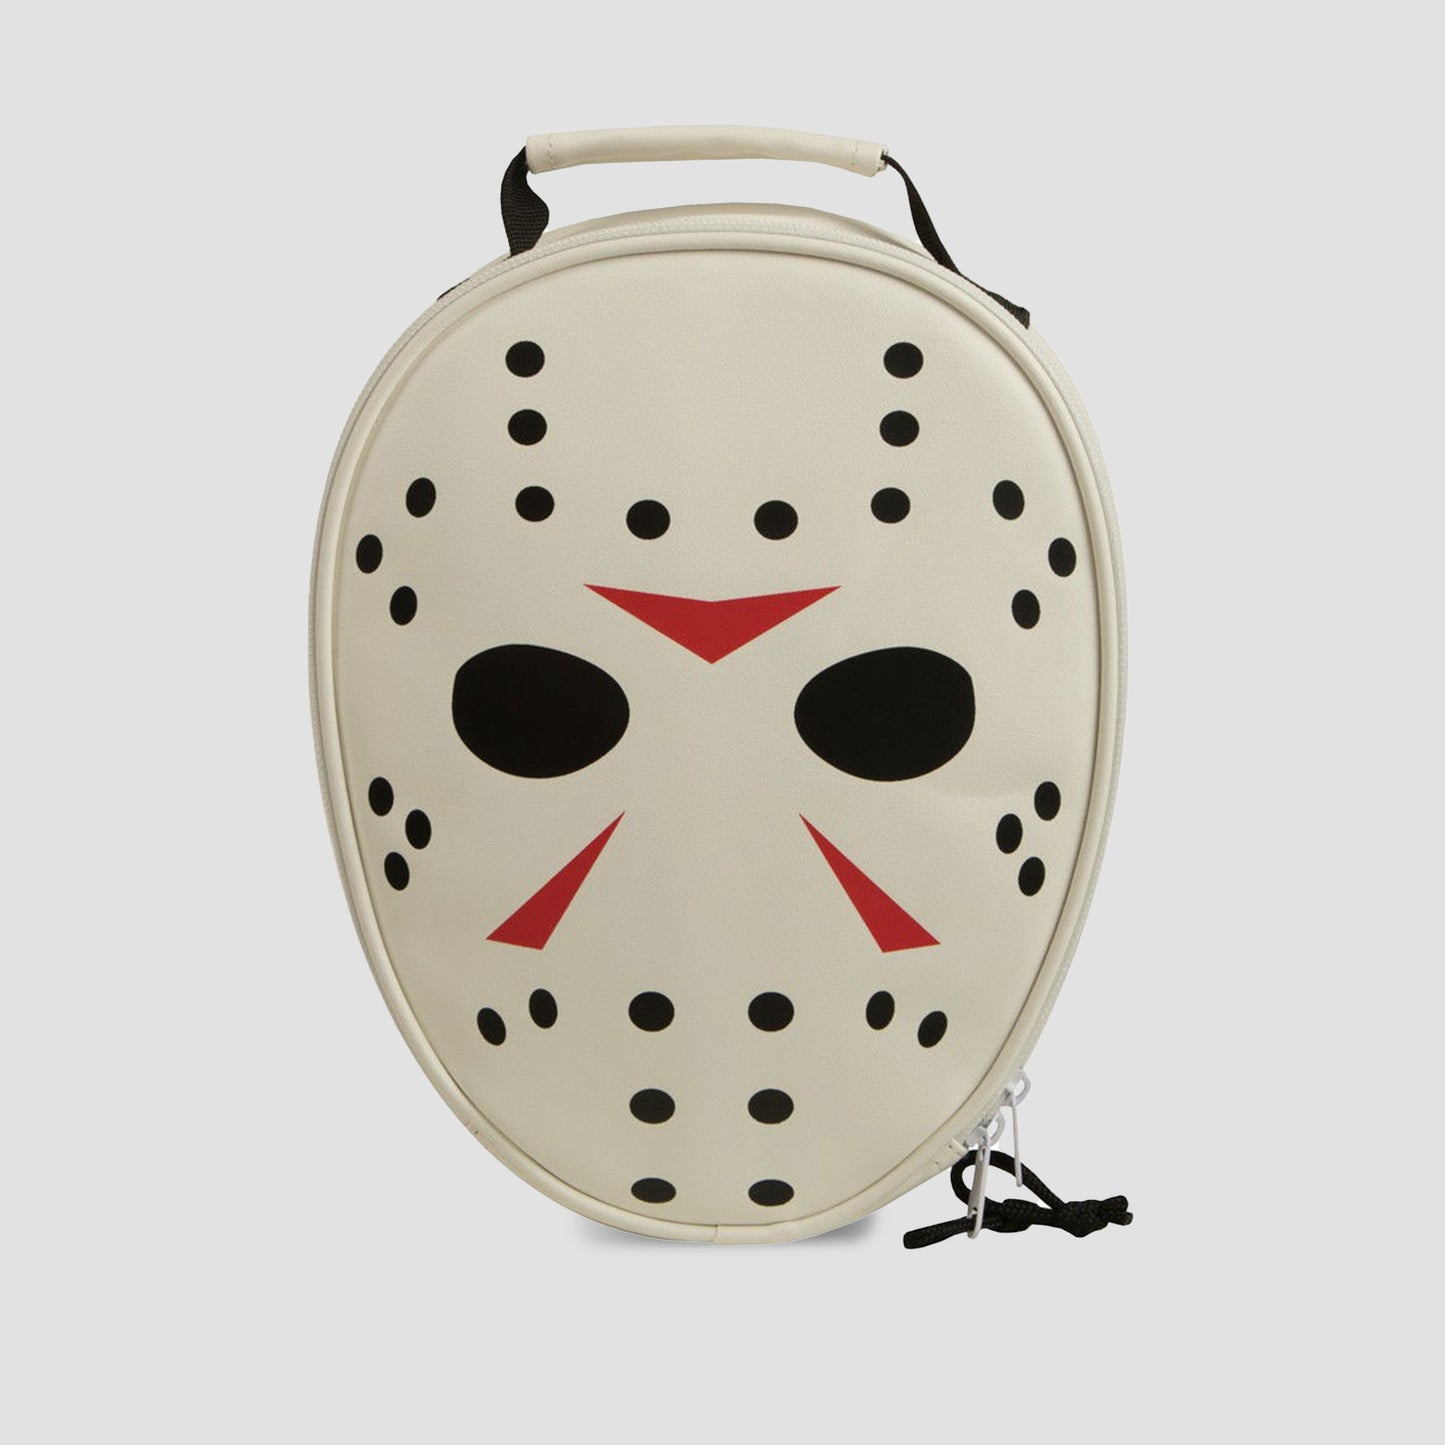 Jason (Friday the 13th) Insulated Lunch Tote Bag